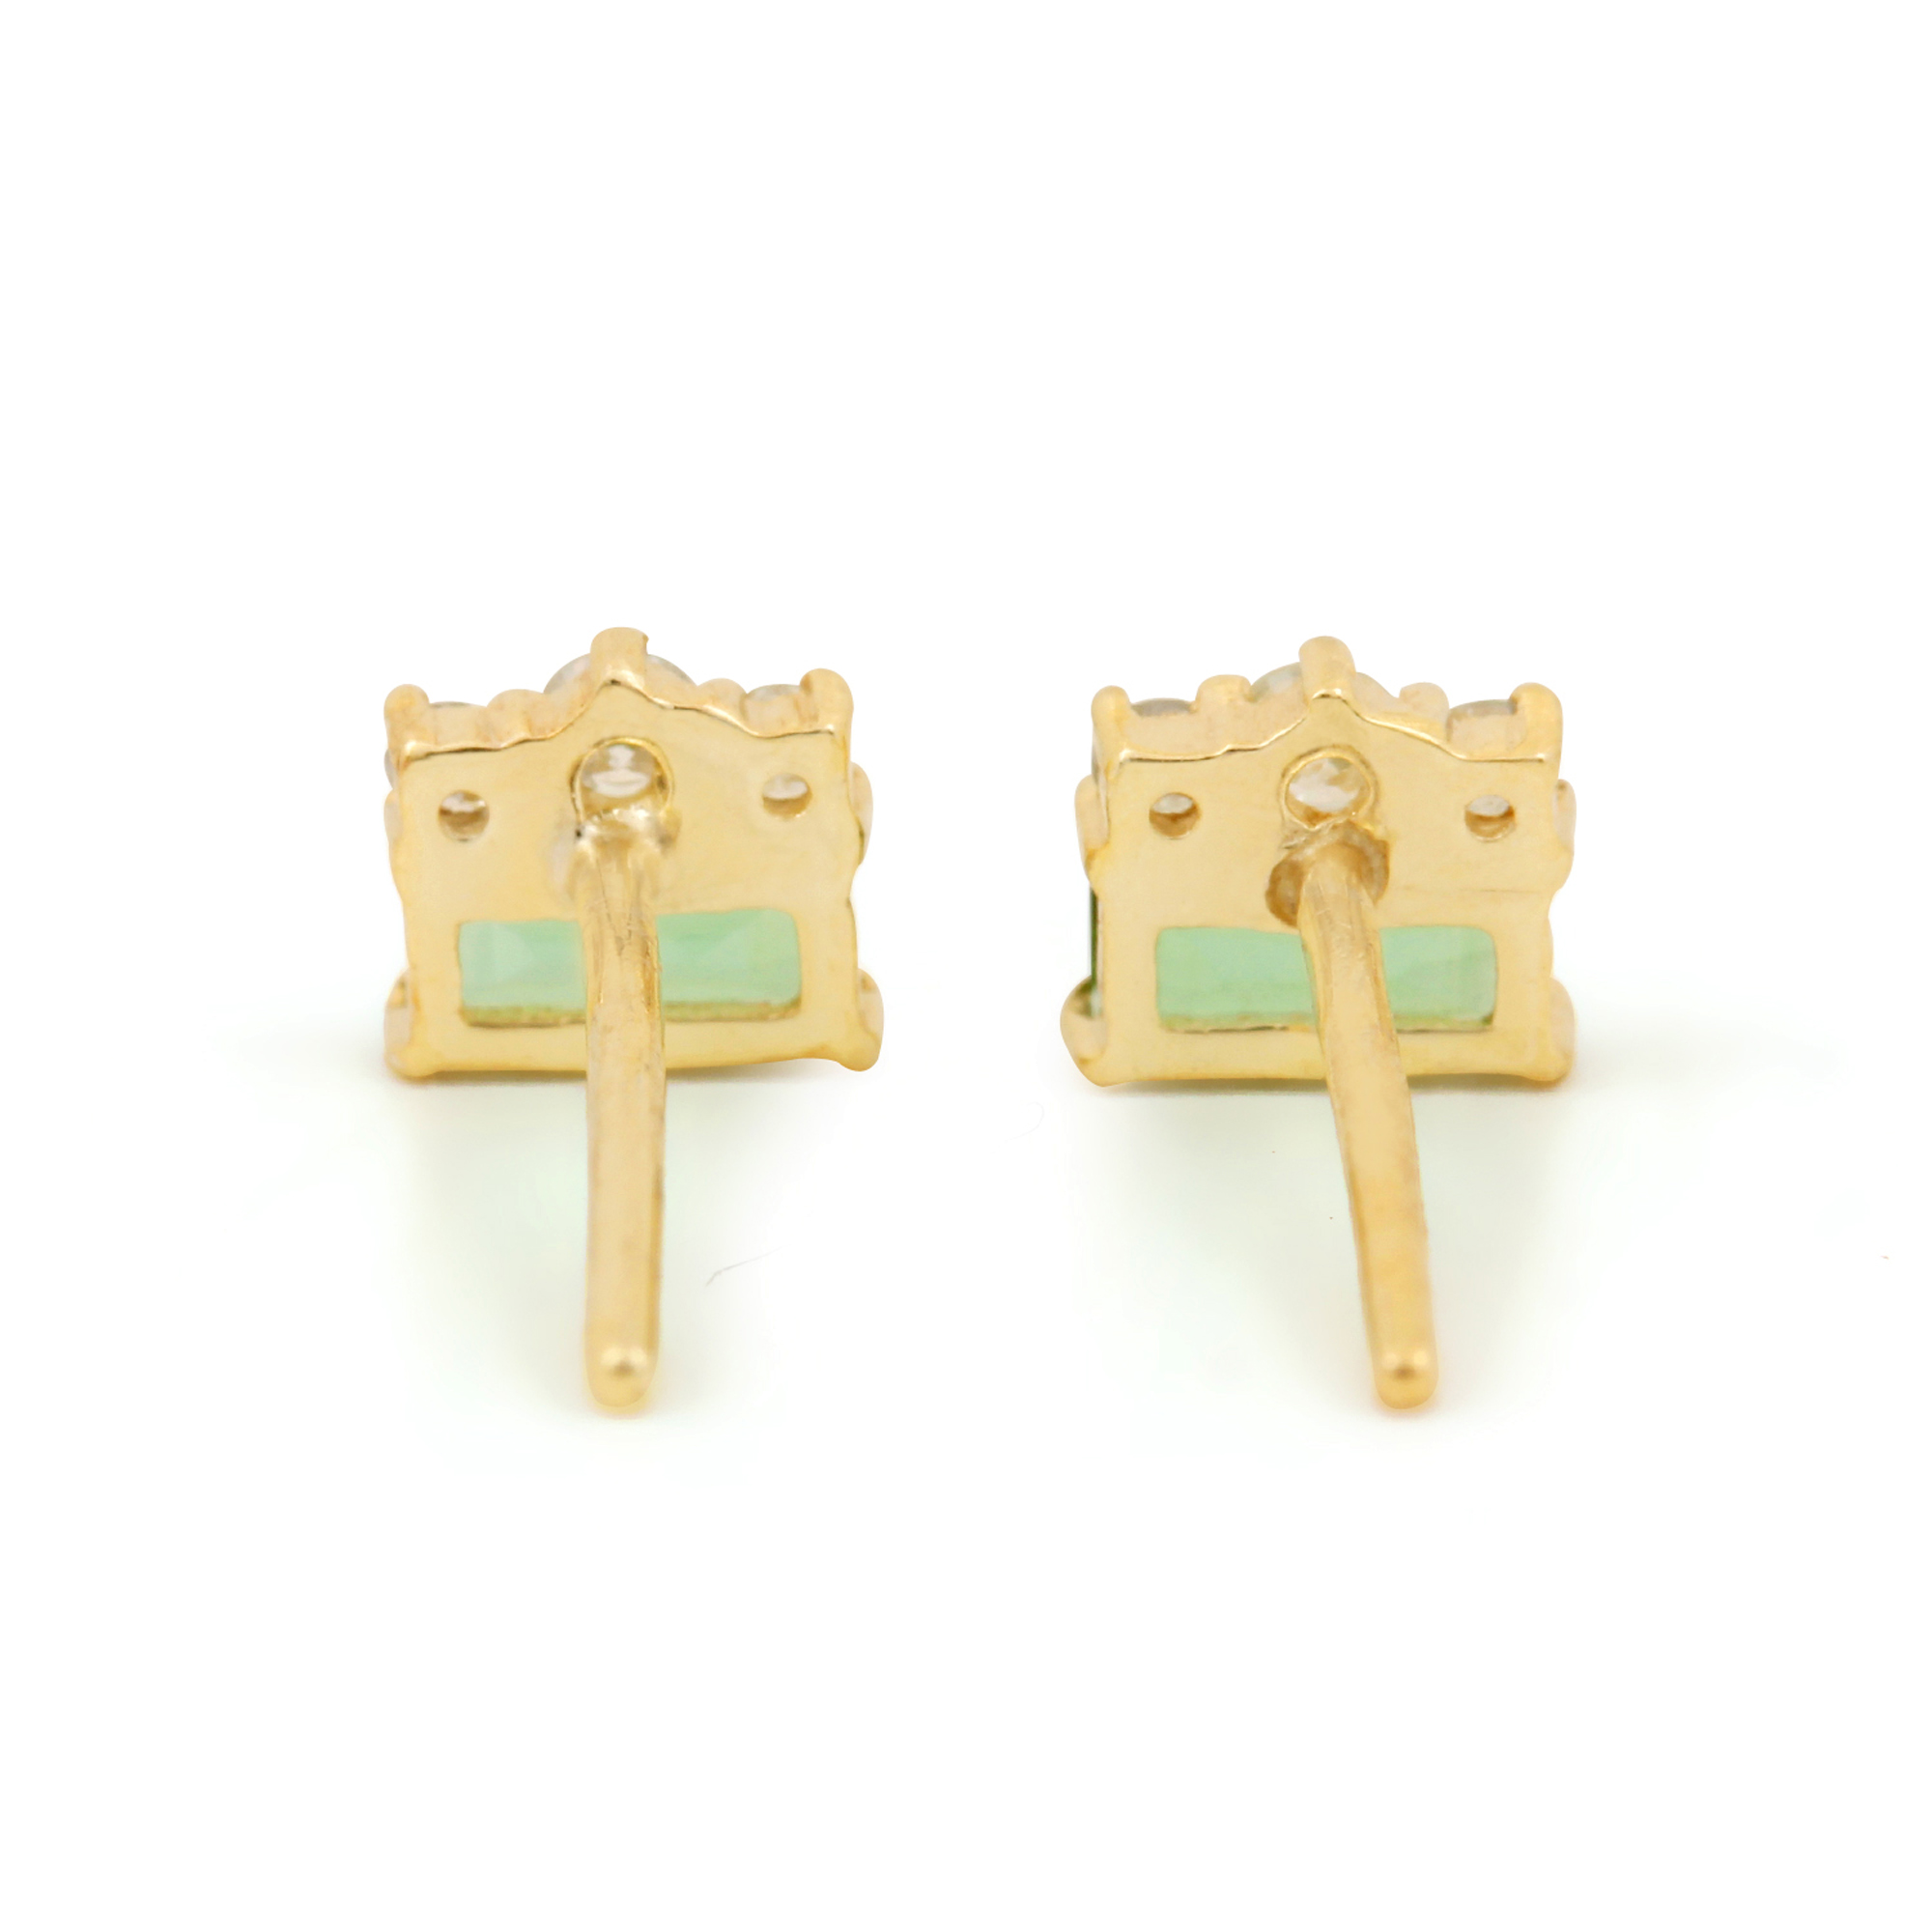 14k Solid Gold Minimalist Stud Earrings Adorned With Natural Diamond & Green Tourmaline